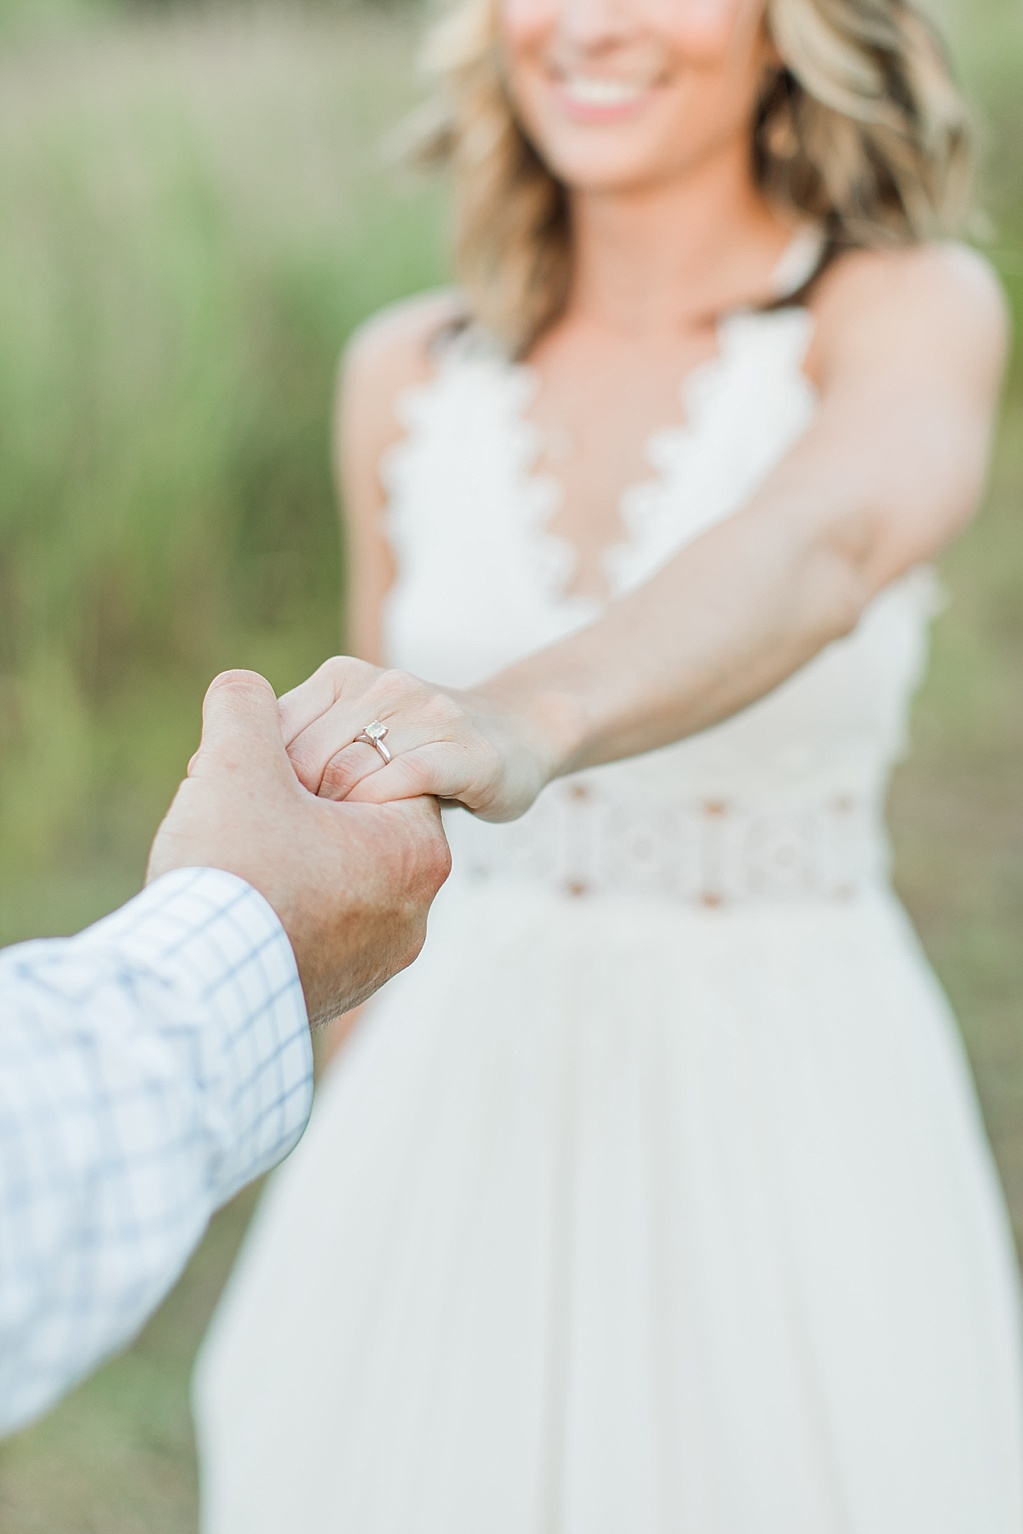 summer Boerne engagement photos at cibolo nature center with white lulus dress 0025